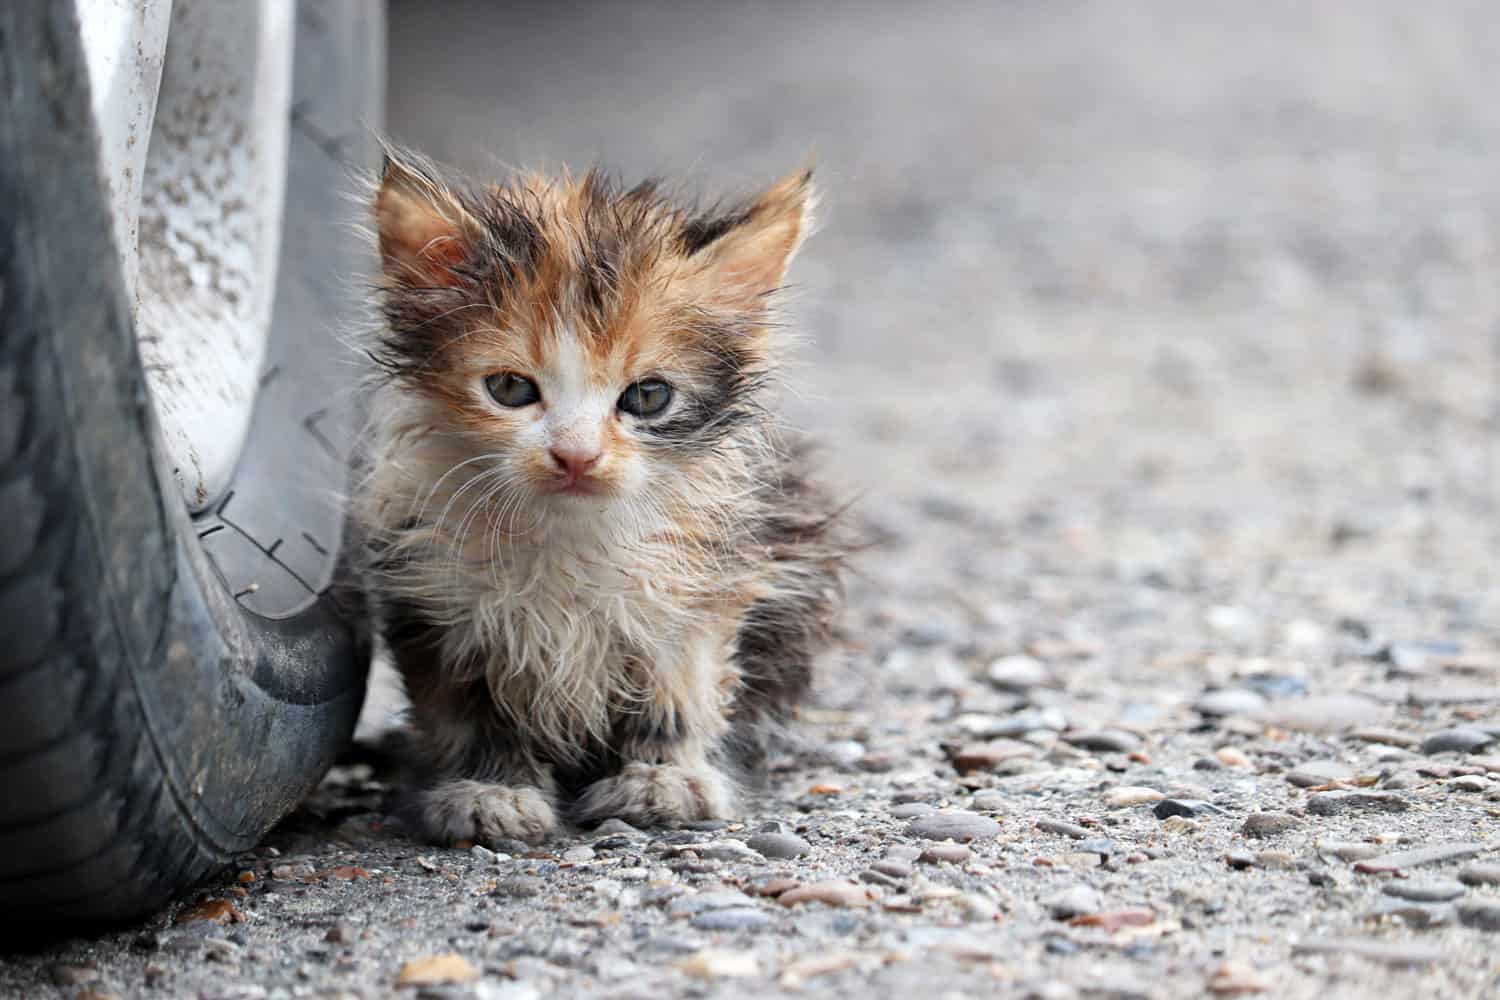 A stray kitten lying next to the car tire